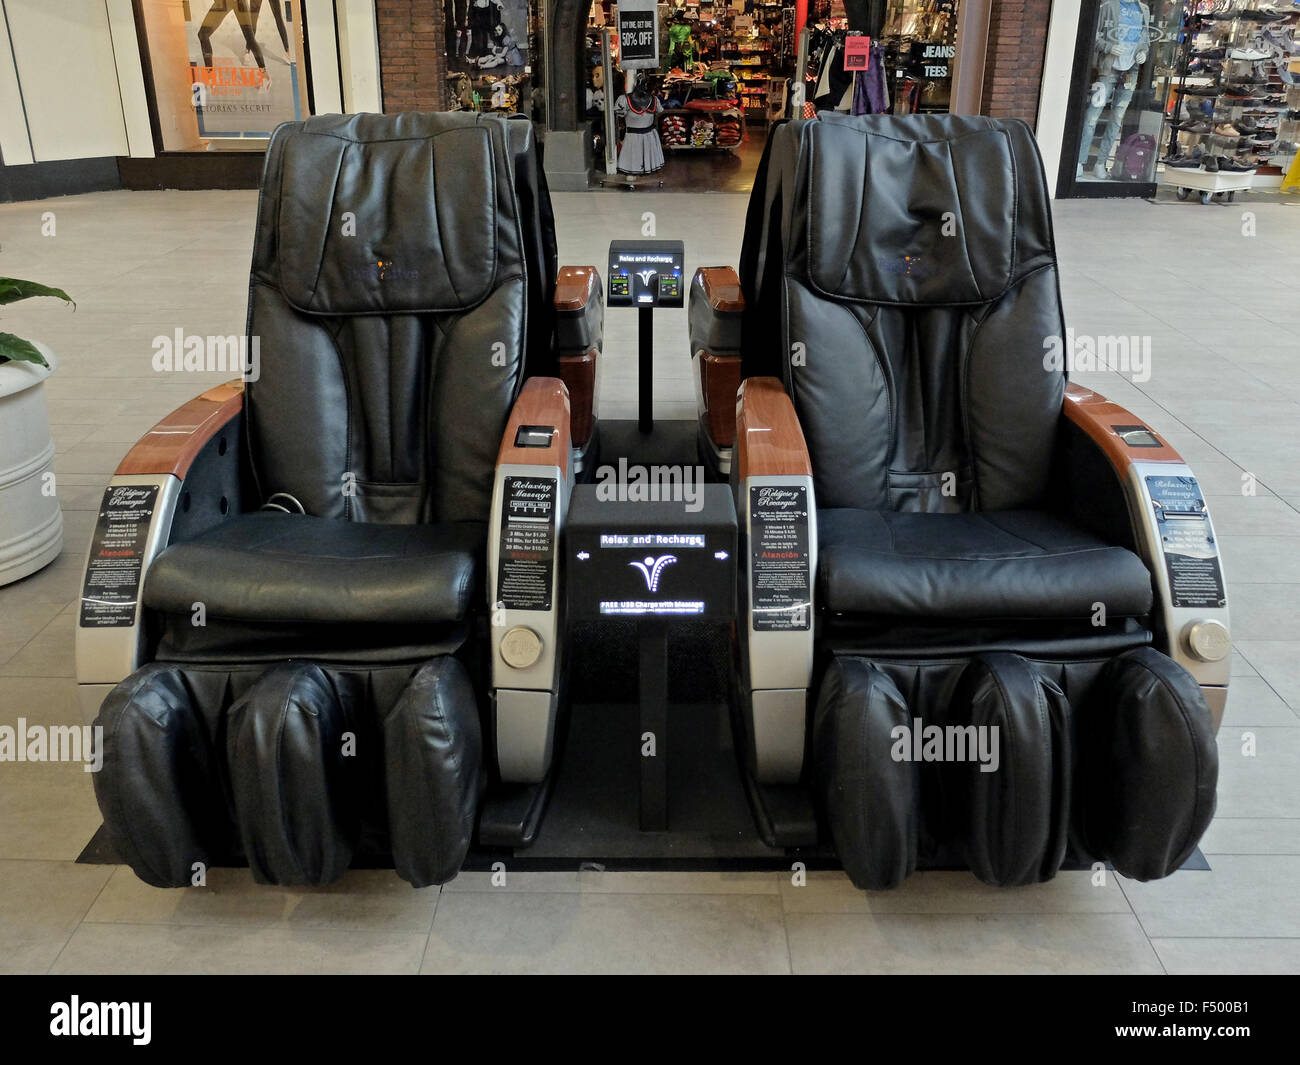 Easy massage chairs at the Broadway Mall in Jericho Long Island where